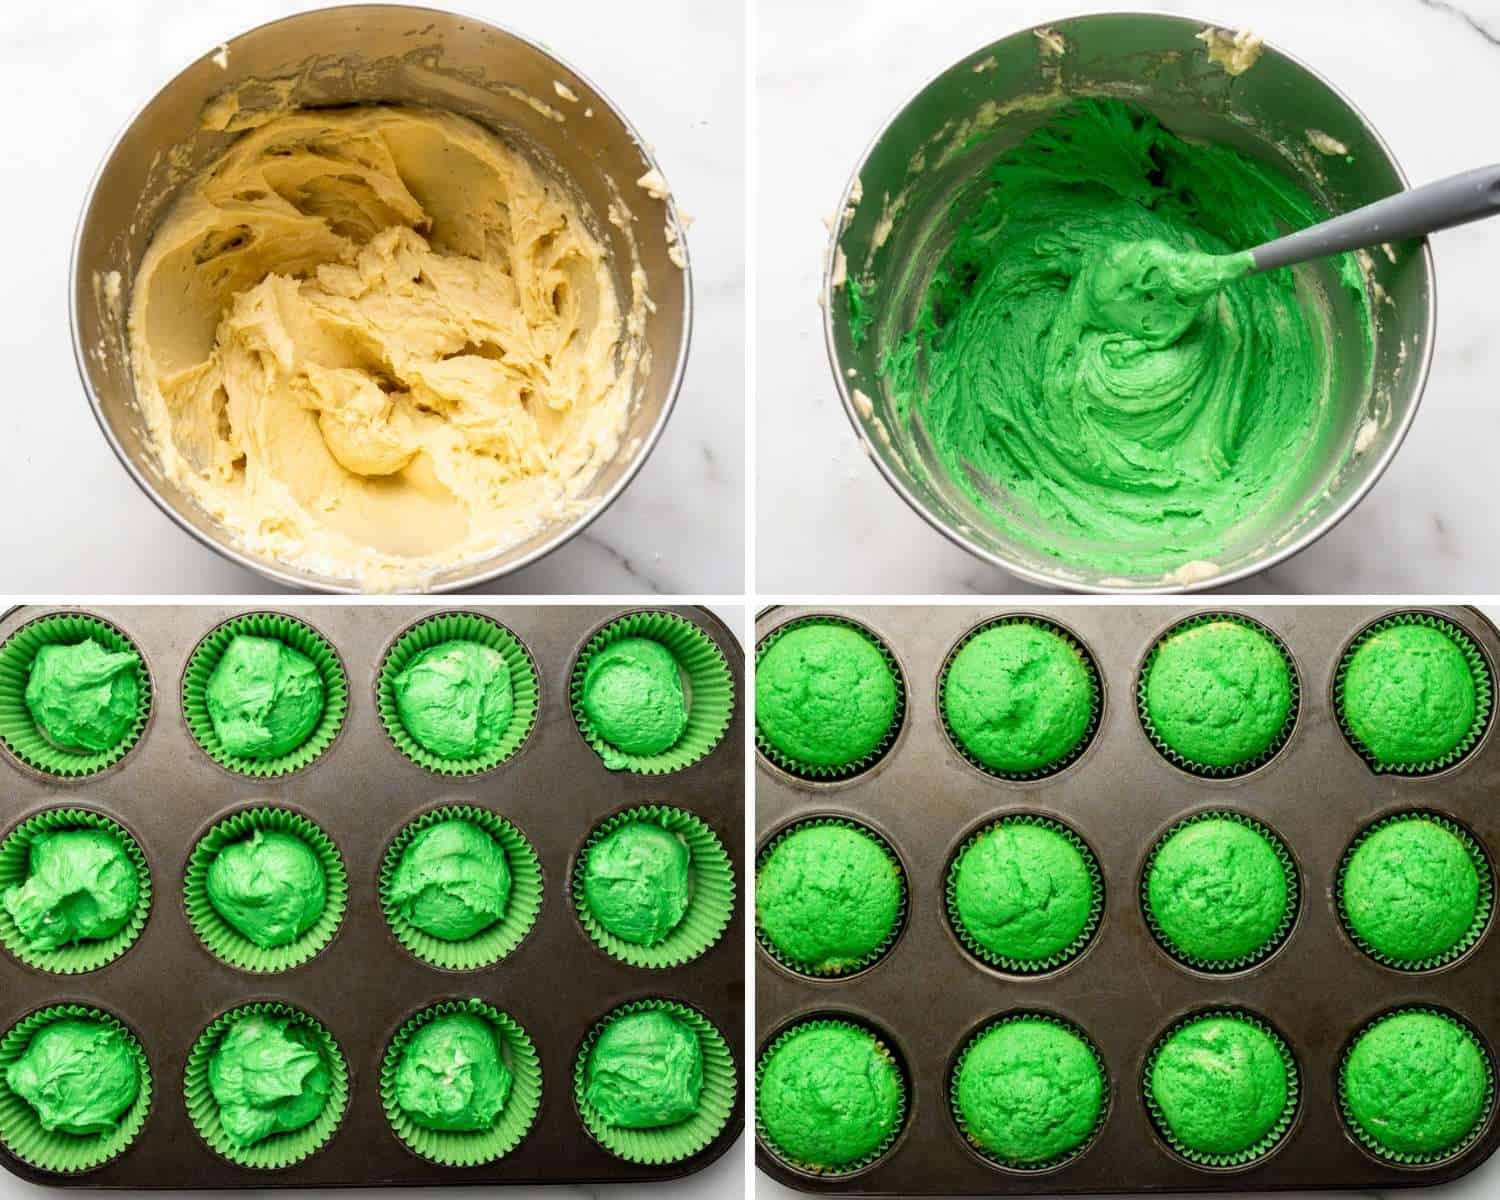 images showing steps to making green cupcakes